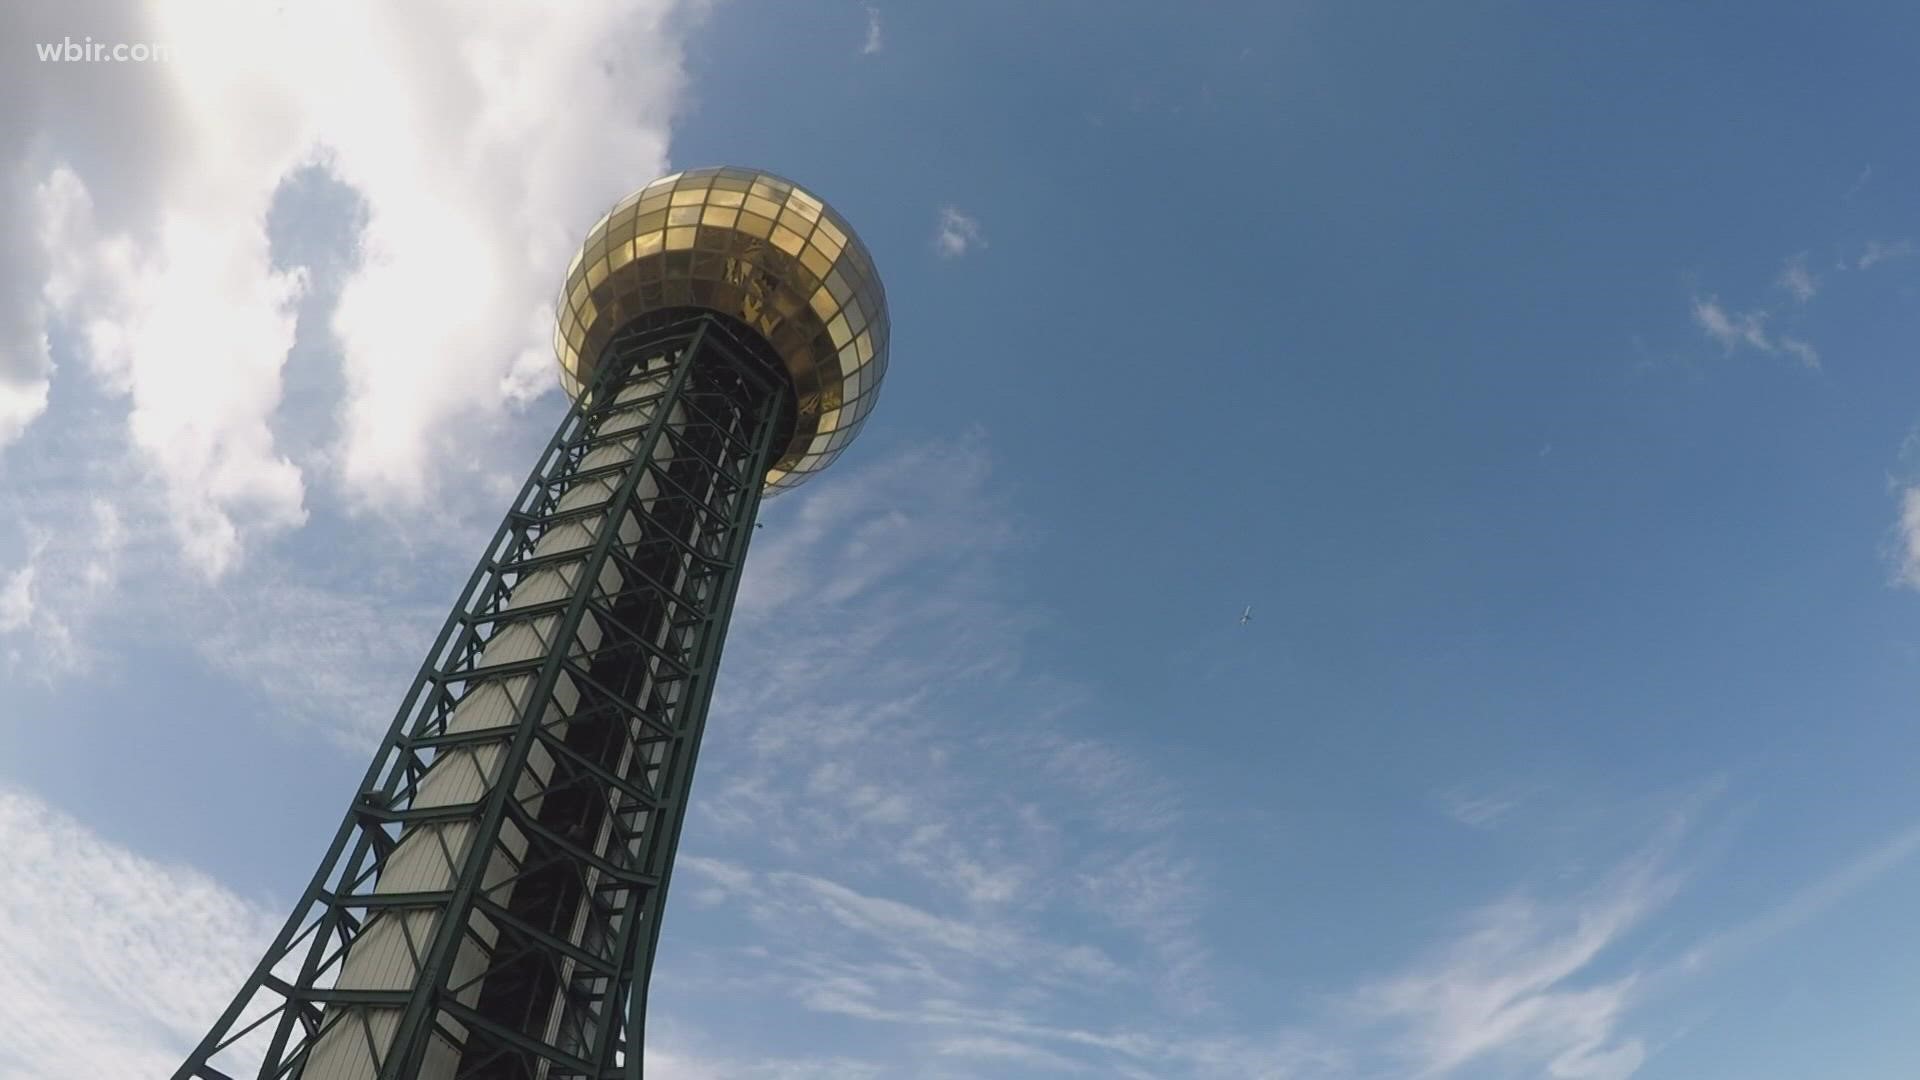 We're approaching the 40th anniversary of the 1982 World's Fair, the iconic festival that we can thank for the Sunsphere and surrounding park.